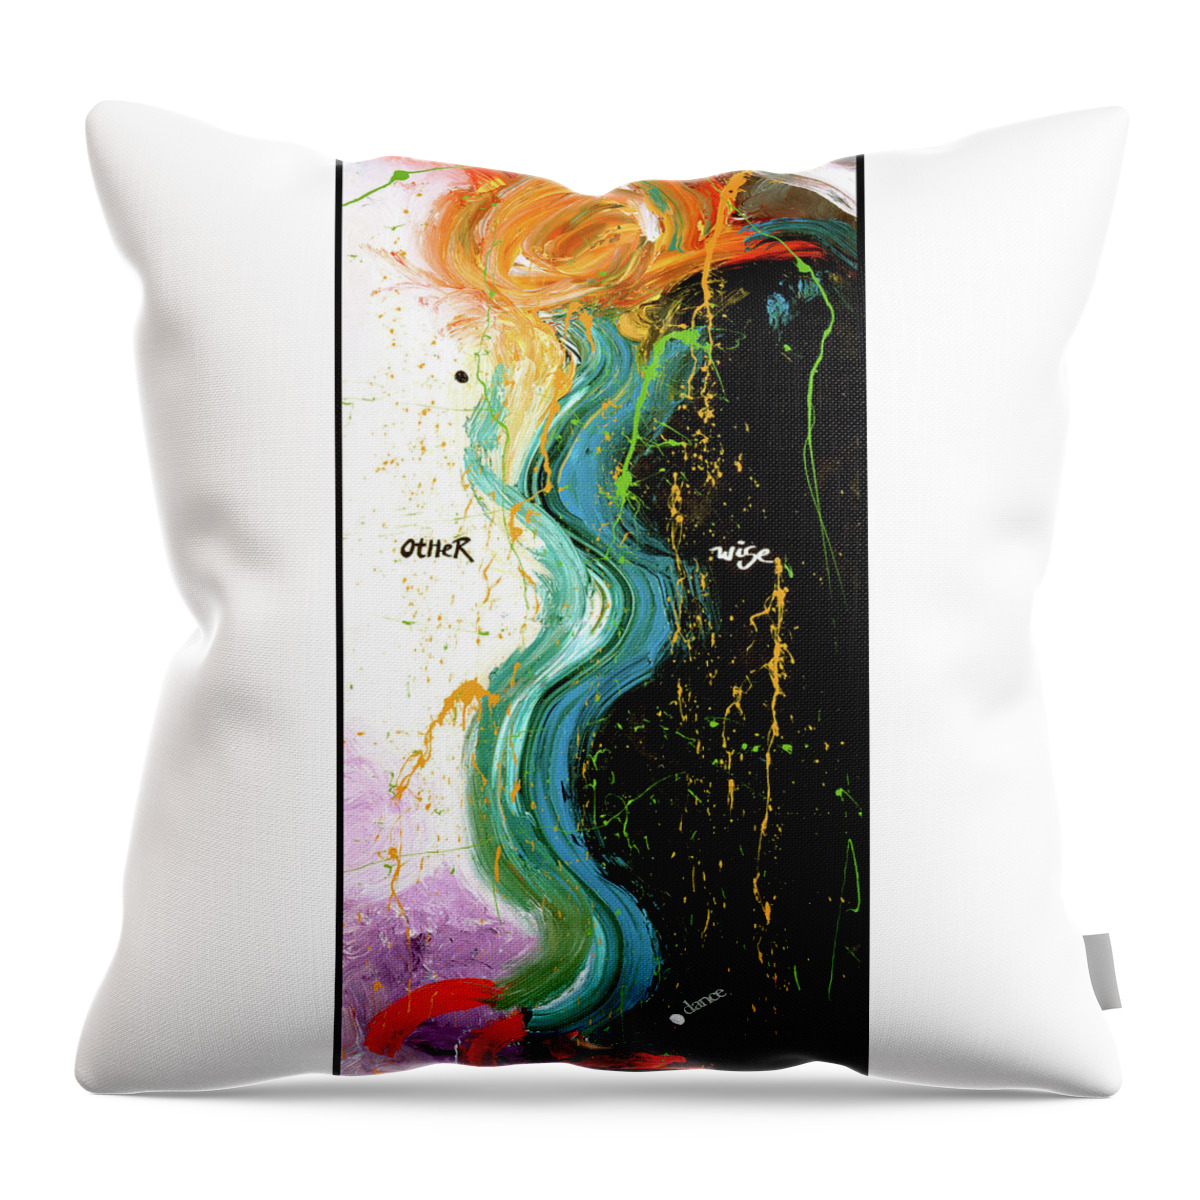 Art Throw Pillow featuring the digital art Other Wise by Dar Freeland